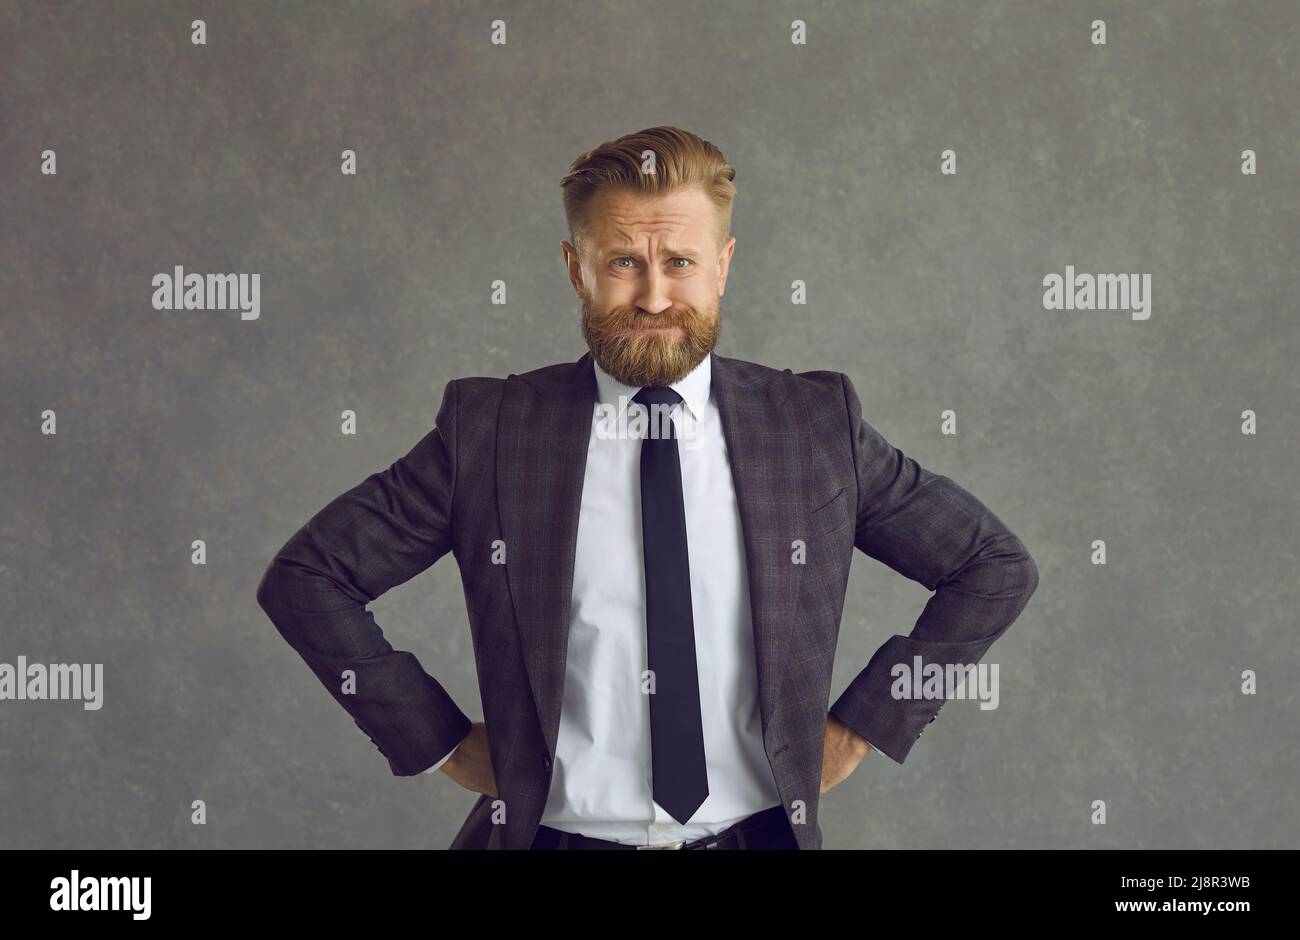 Anxious and tense businessman expecting something while standing on a gray background. Stock Photo